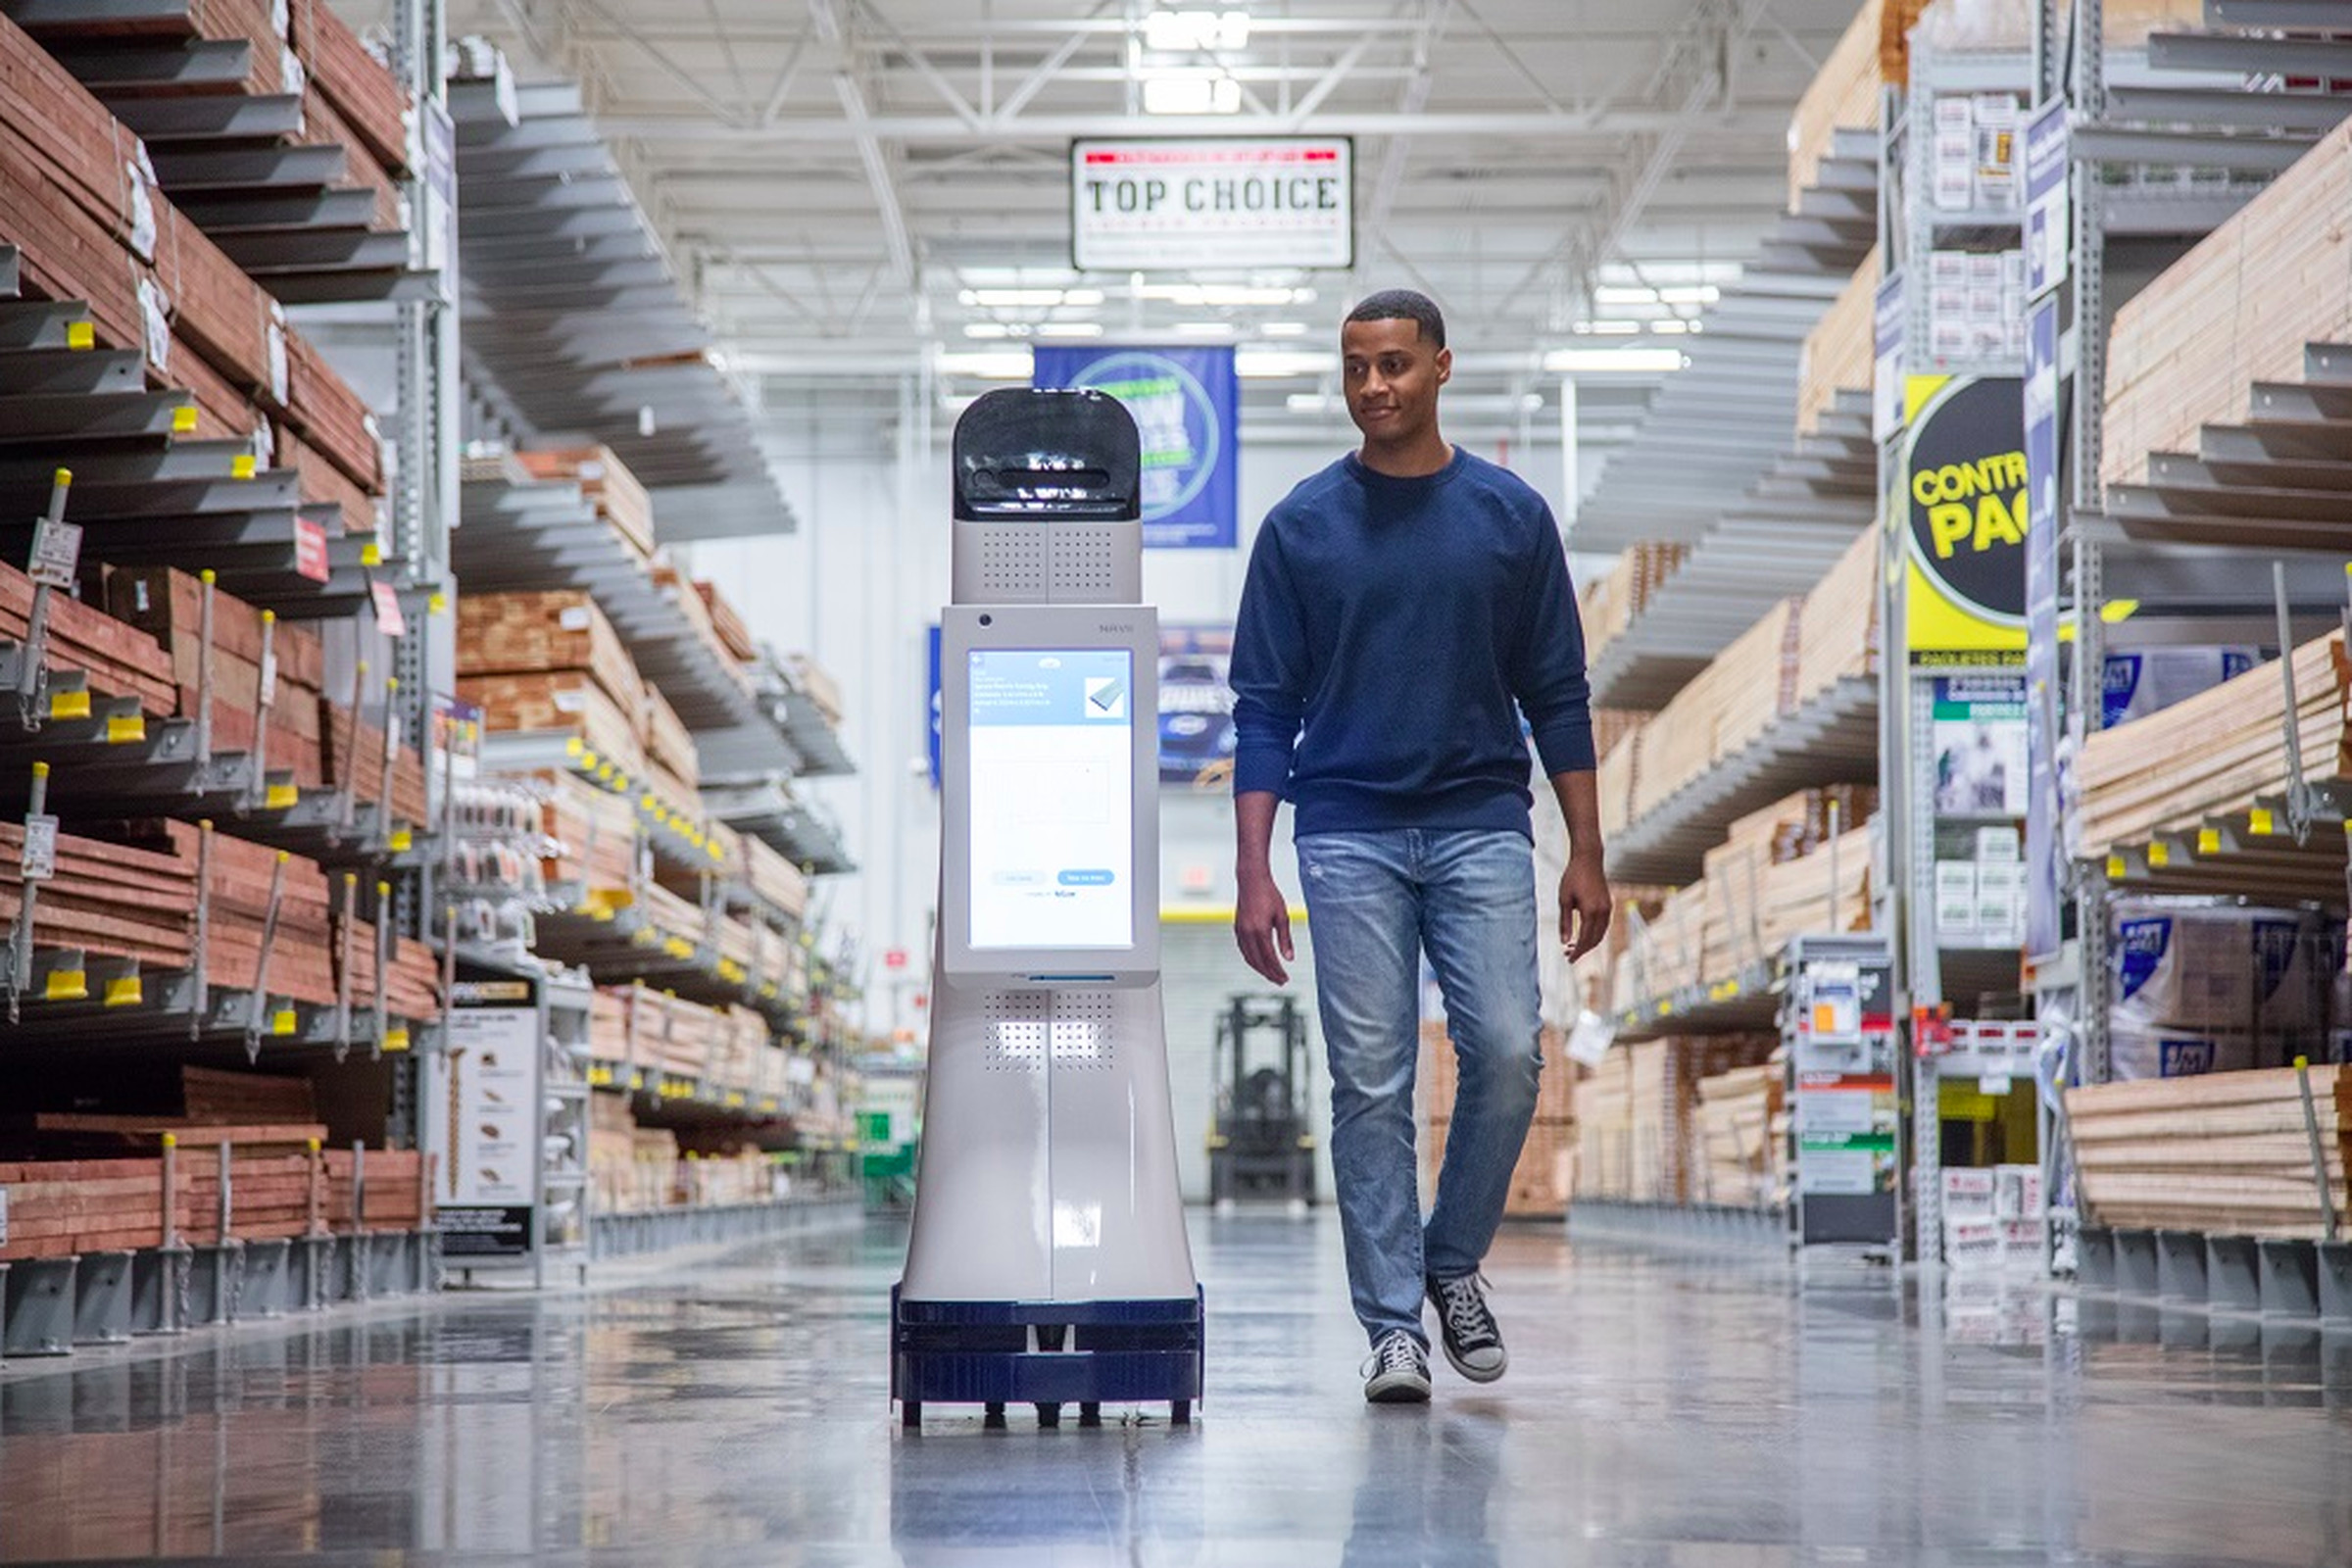 Nvidia’s chips will be used to power autonomous robots like the one above, which guides customers around Lowe’s stores.